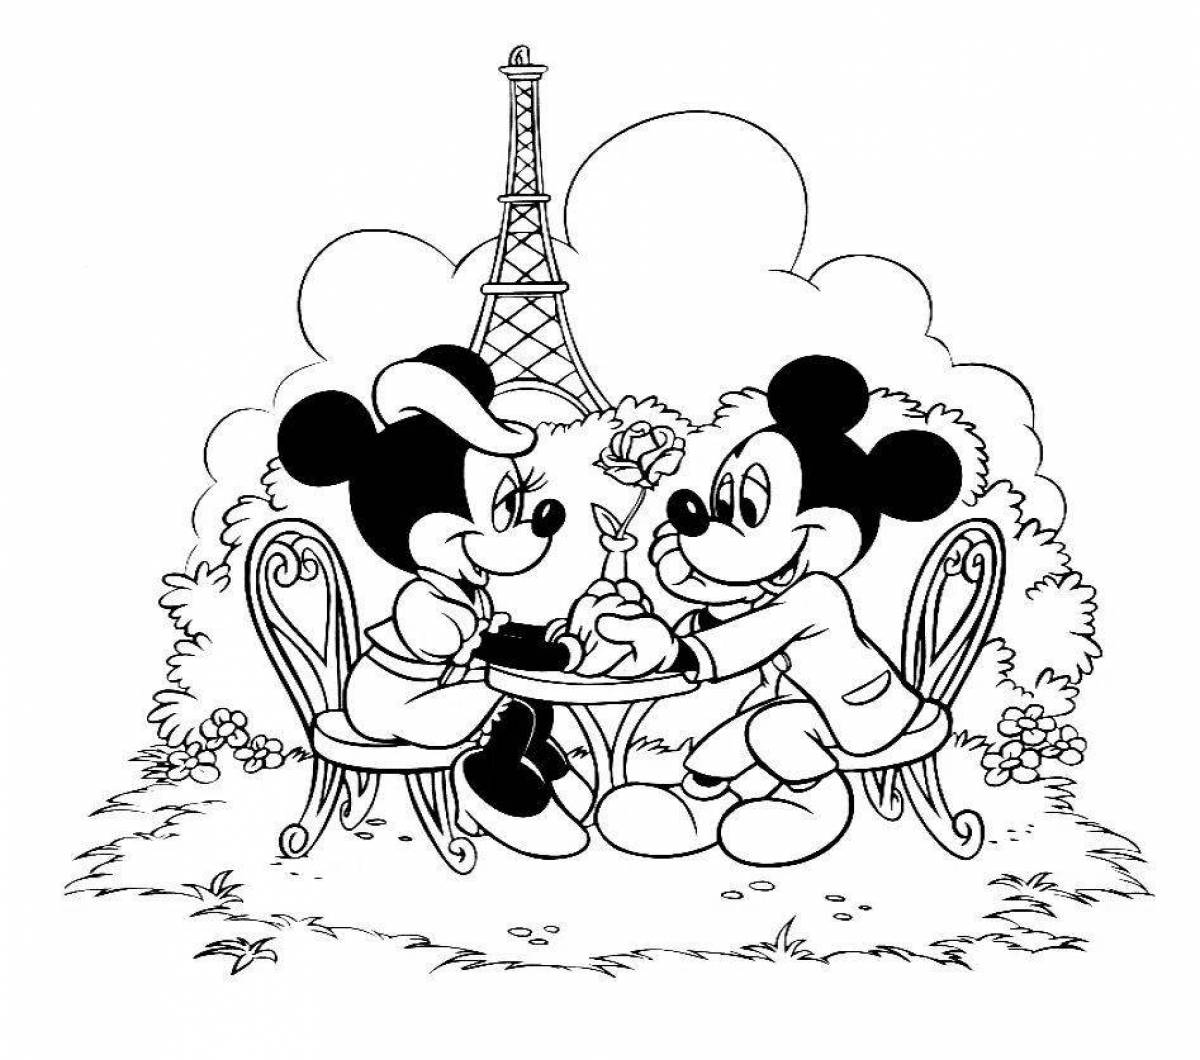 Mickey's whimsical coloring book